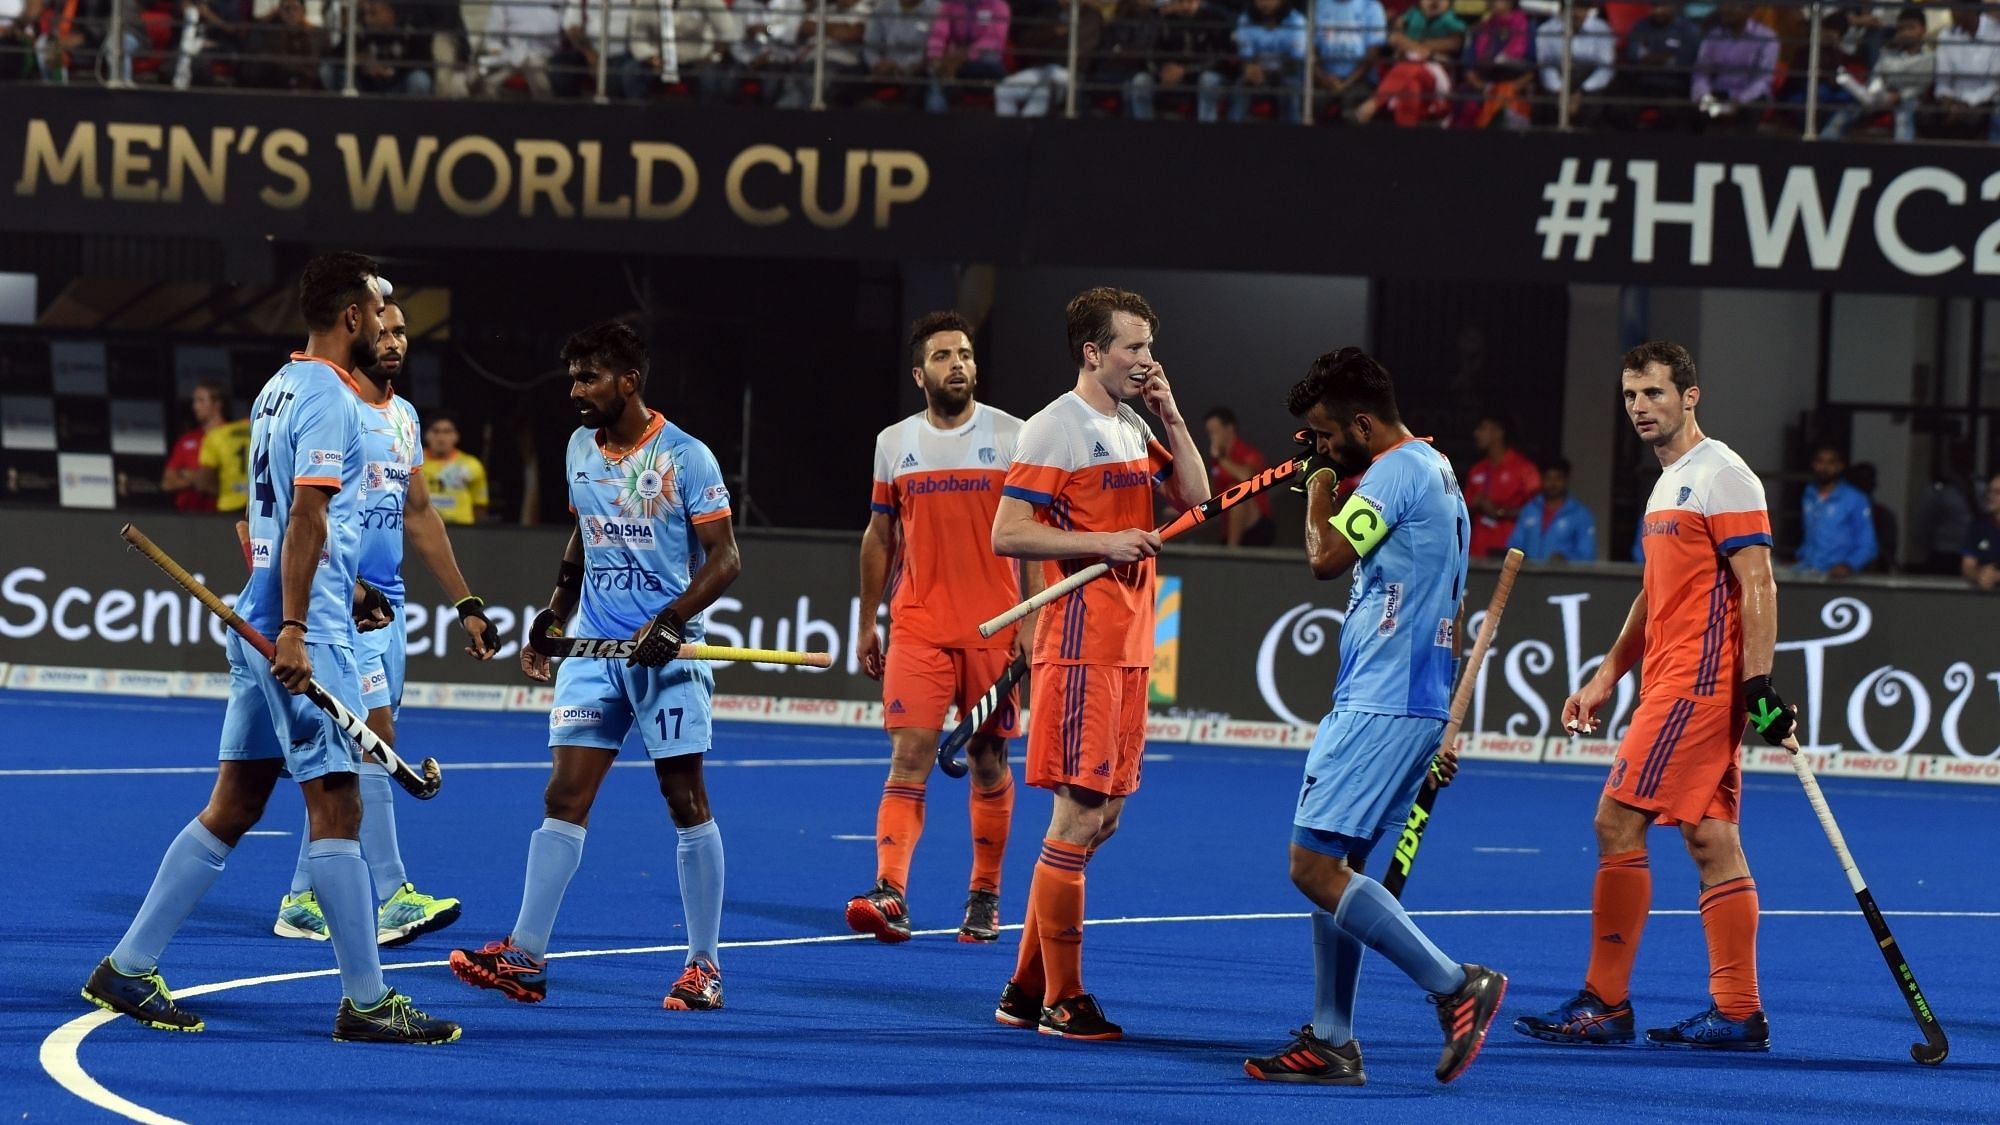 India went down 2-1 to Netherlands in the quarter-final of the 2018 FIH Men’s Hockey World Cup.